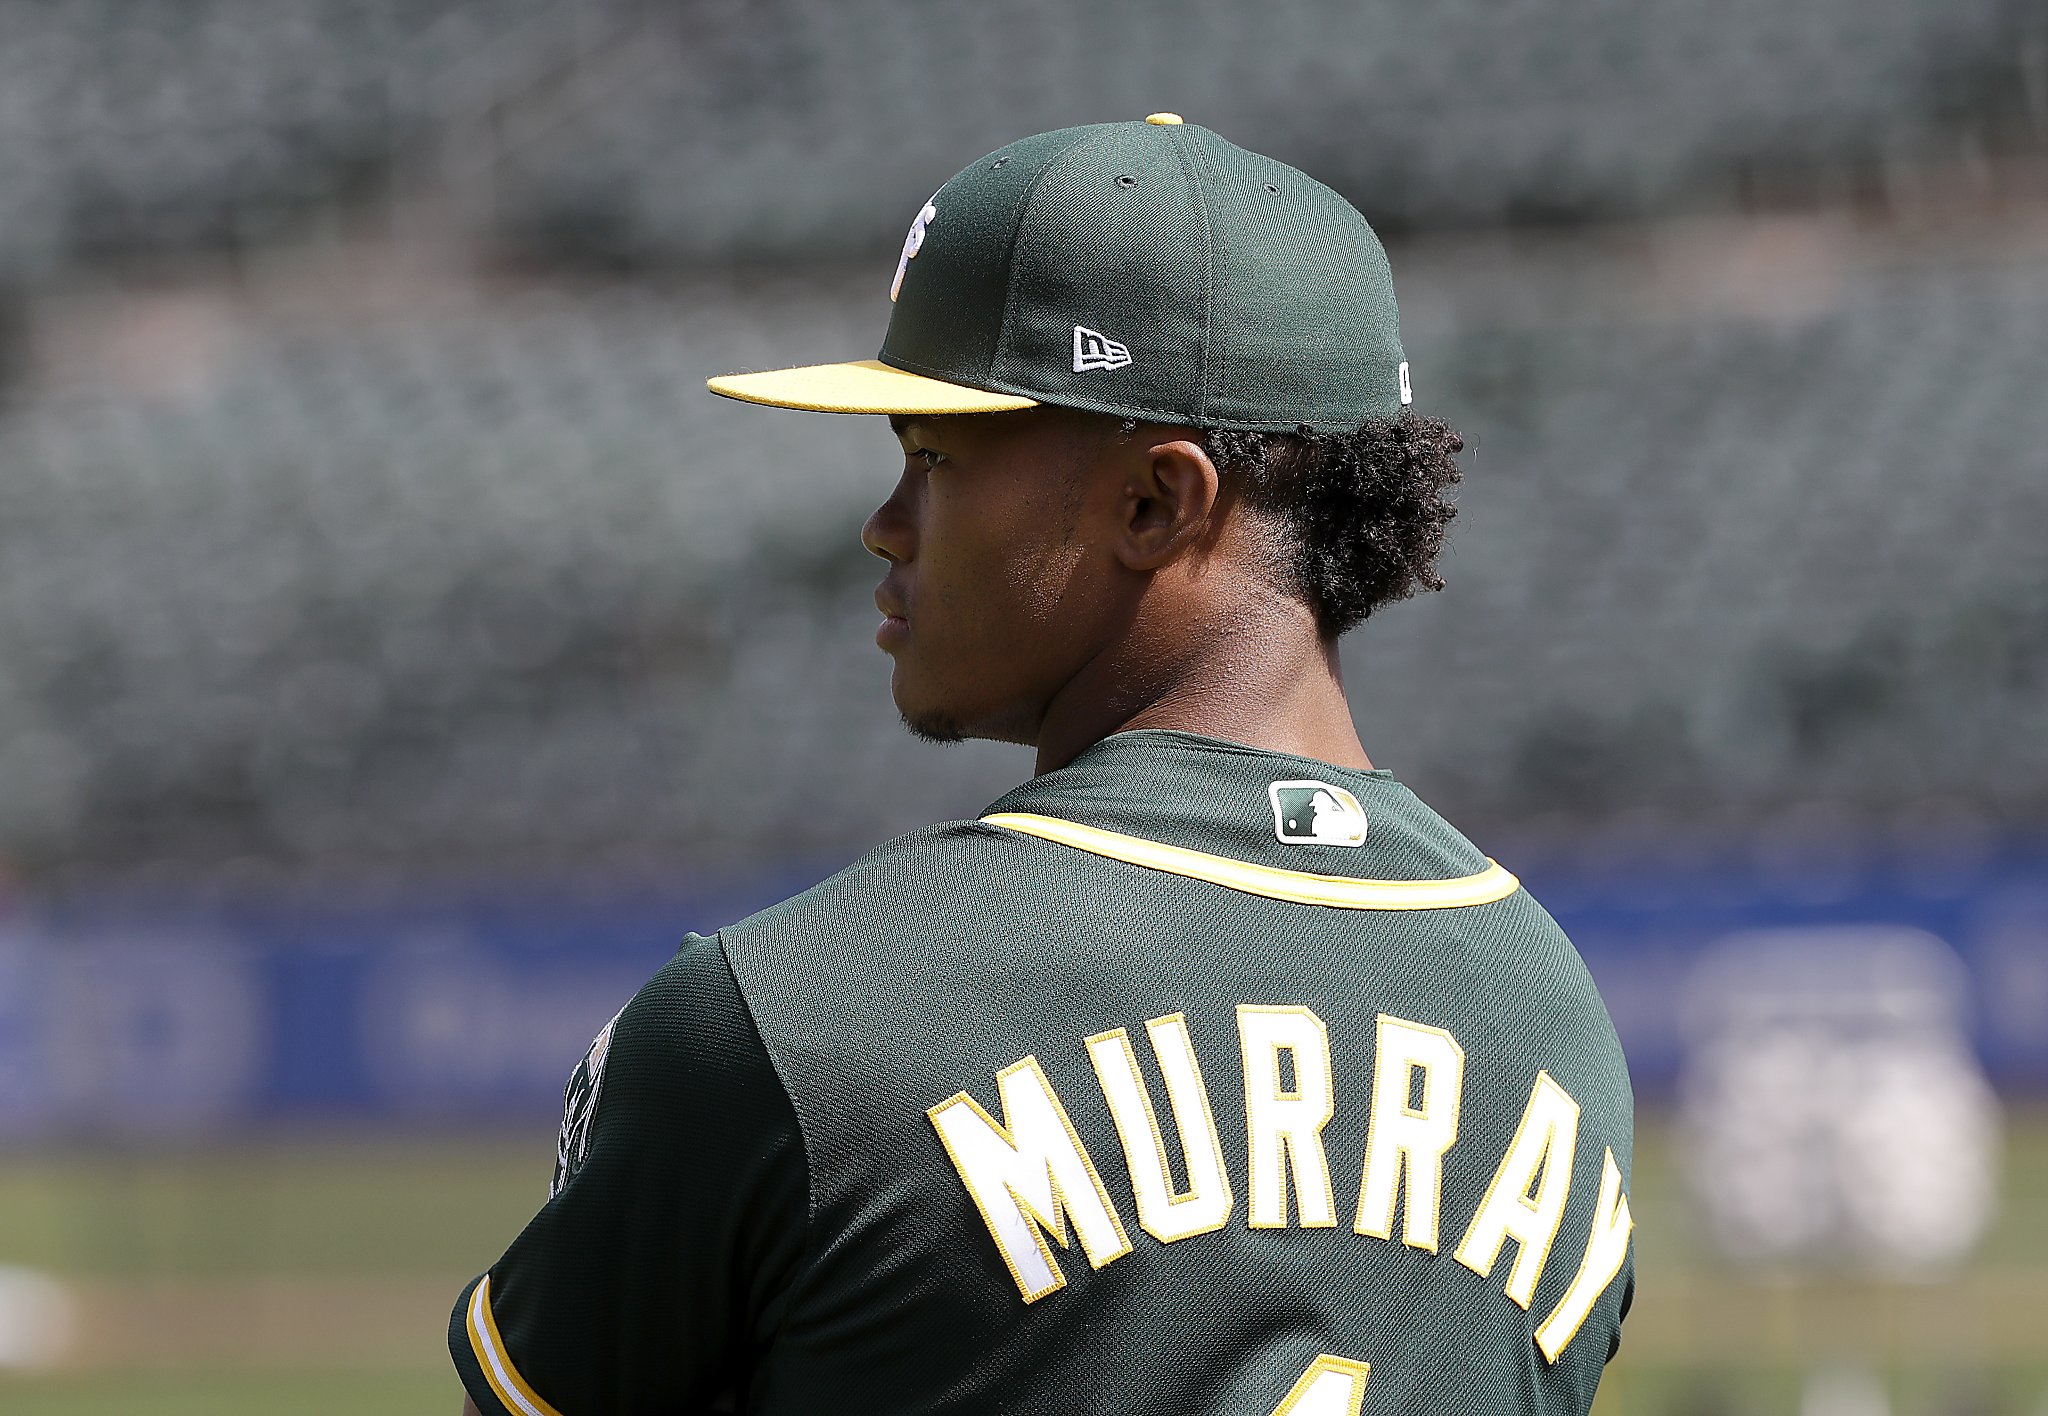 Oakland A's on X: Kyler Murray visits the Coliseum today. Welcome to  Oakland! #RootedInOakland  / X